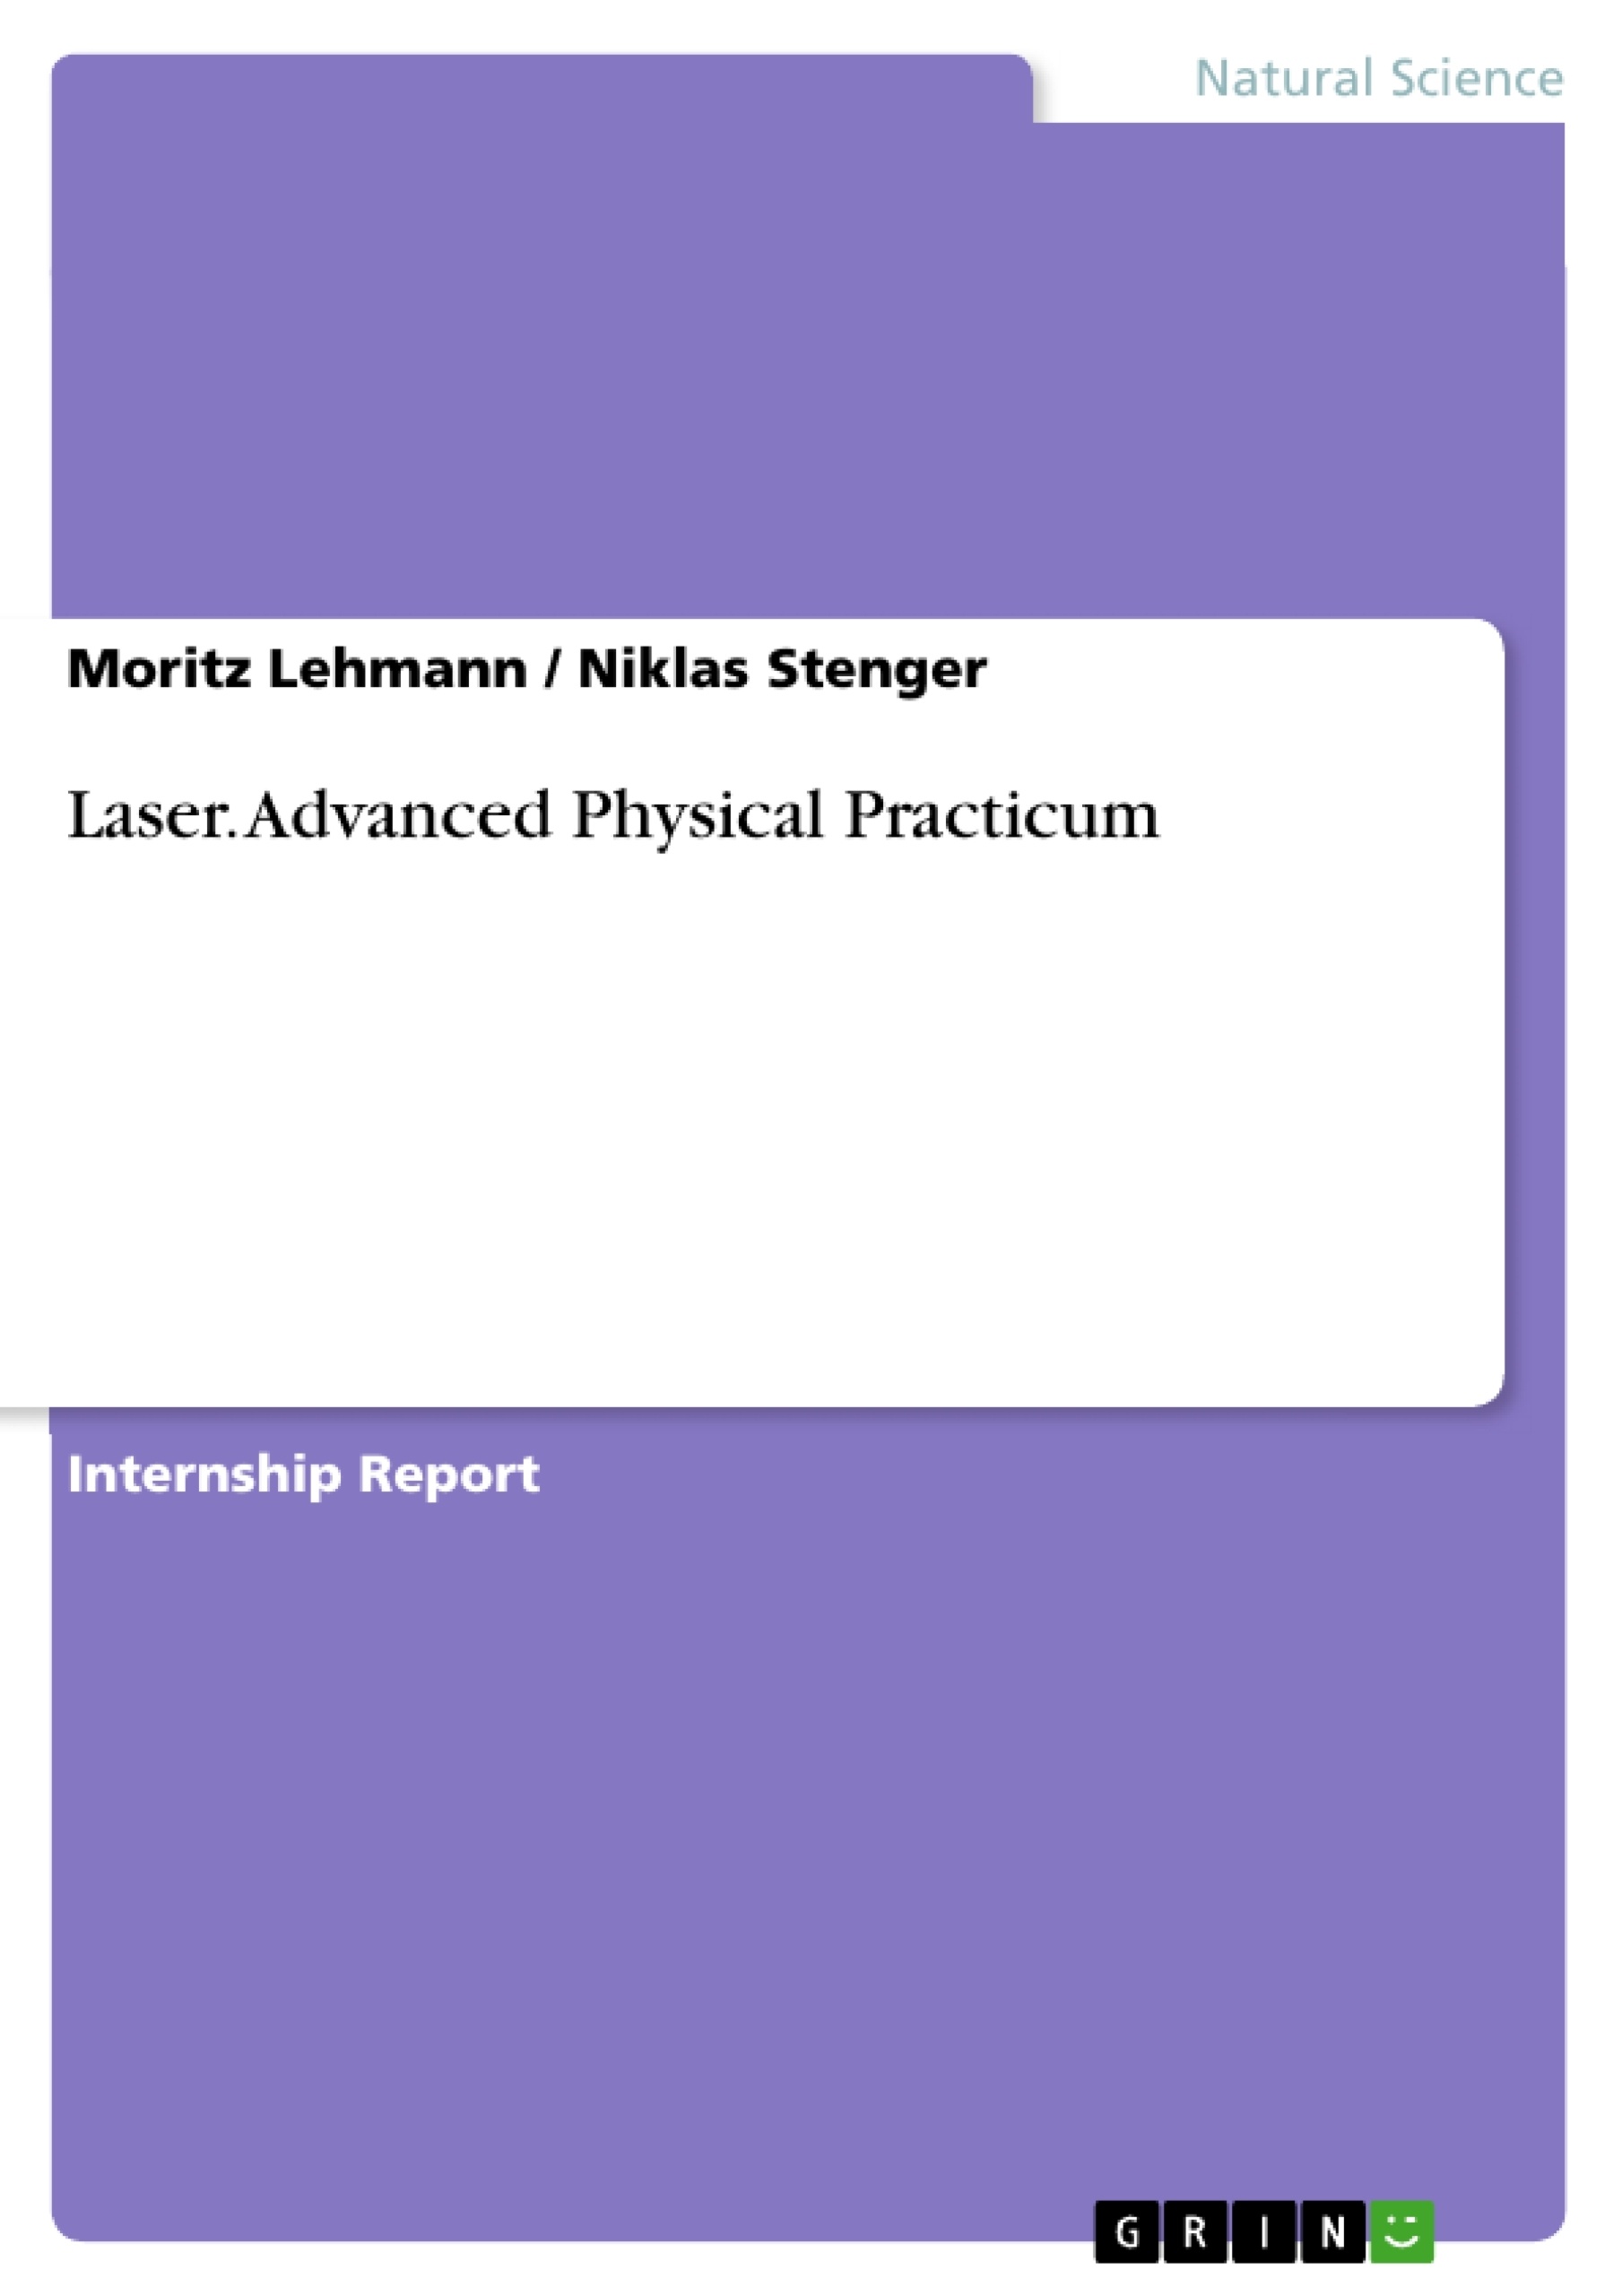 Title: Laser. Advanced Physical Practicum